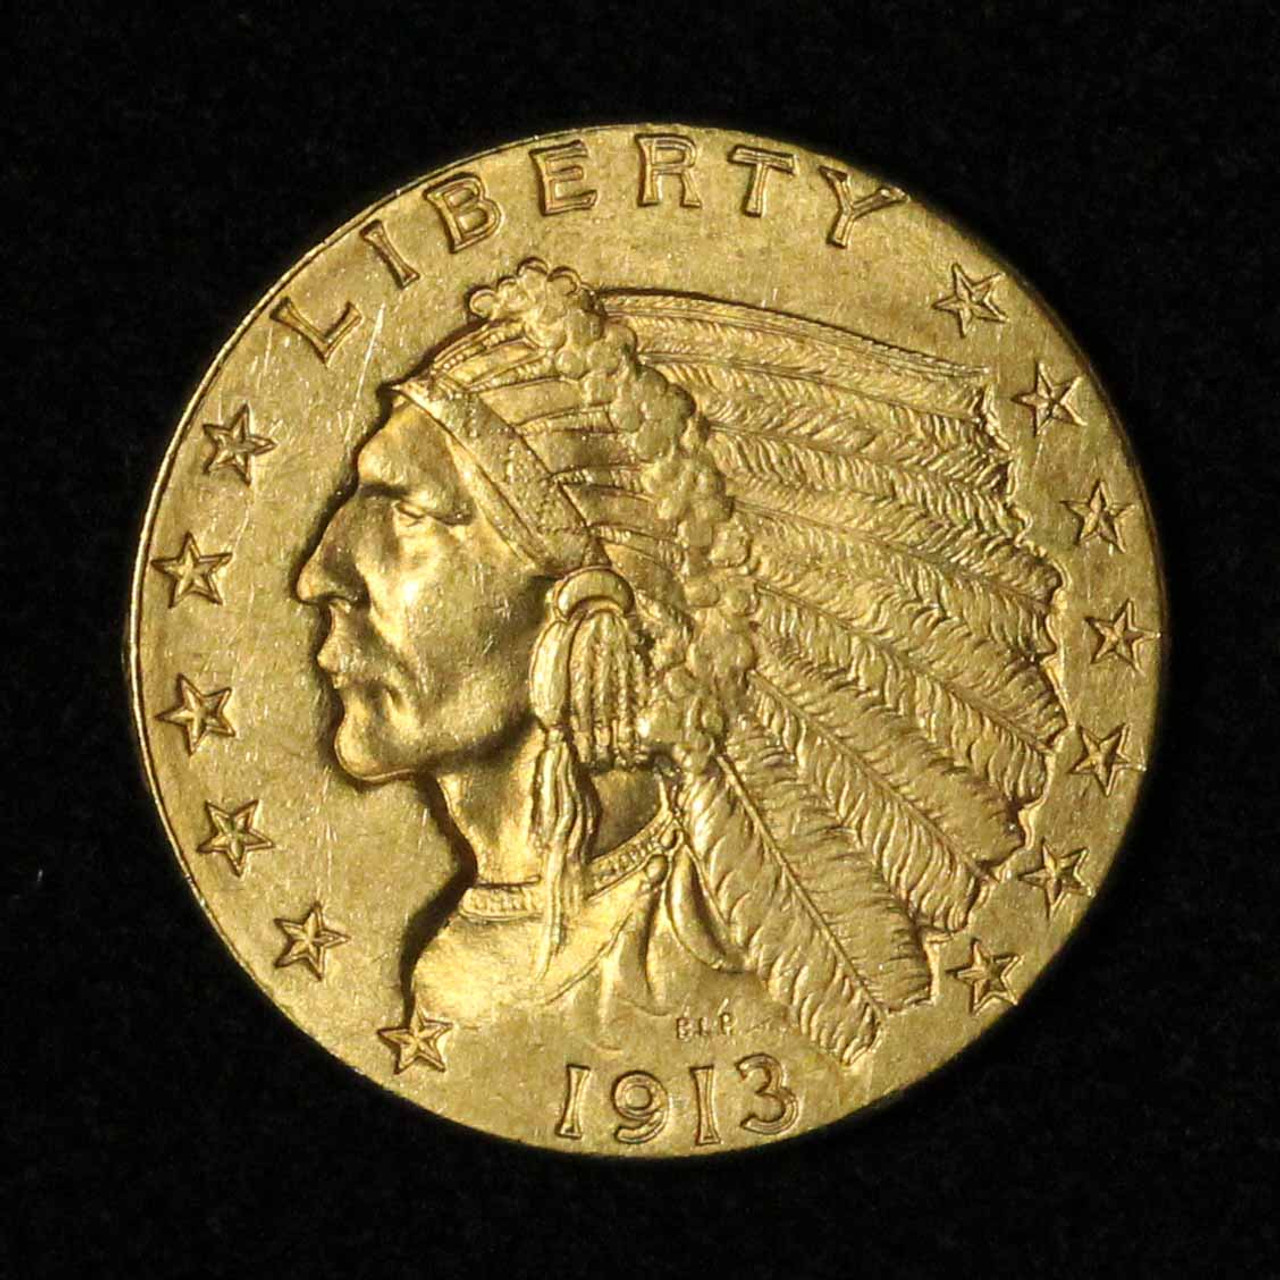 1907 $2.50 Gold Liberty Quarter Eagle - Hairlines - Free Shipping